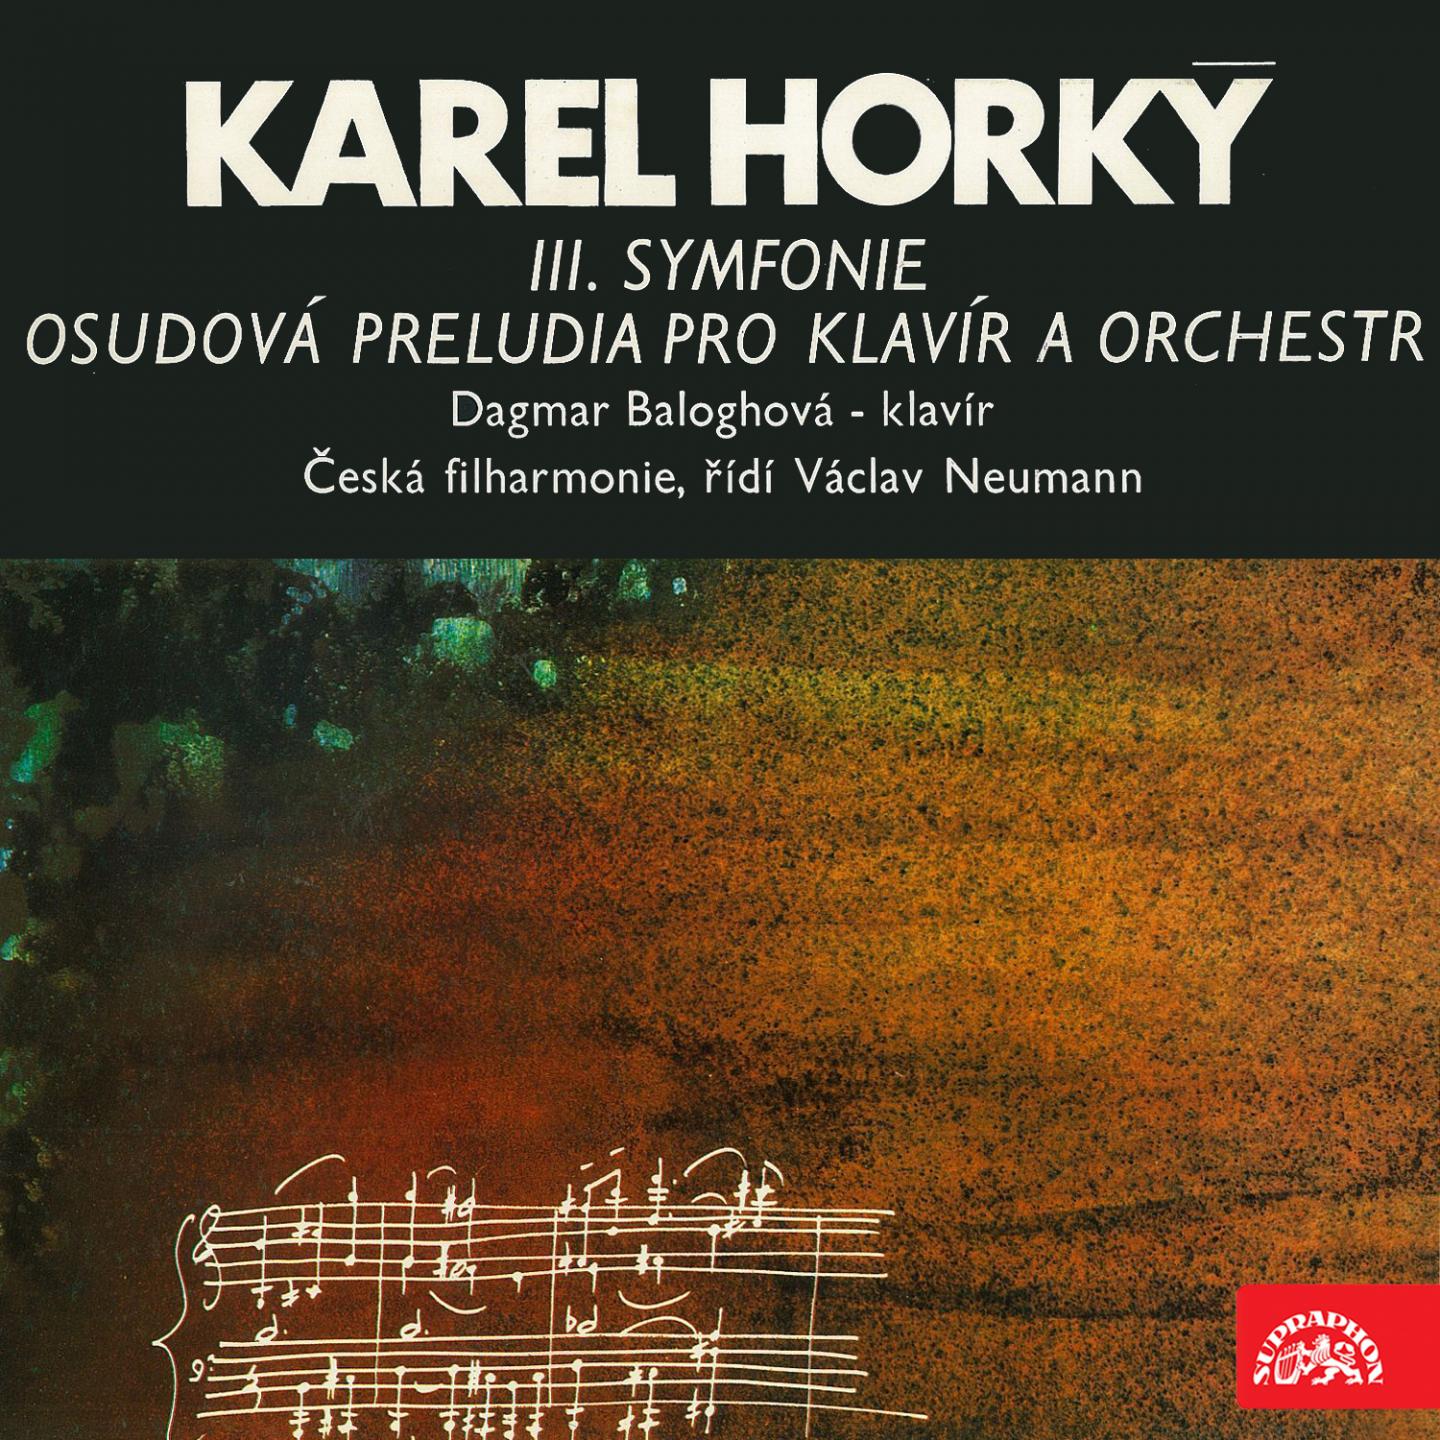 Hork: Symphony No. 3, Fateful Preludes for Piano and Orchestra